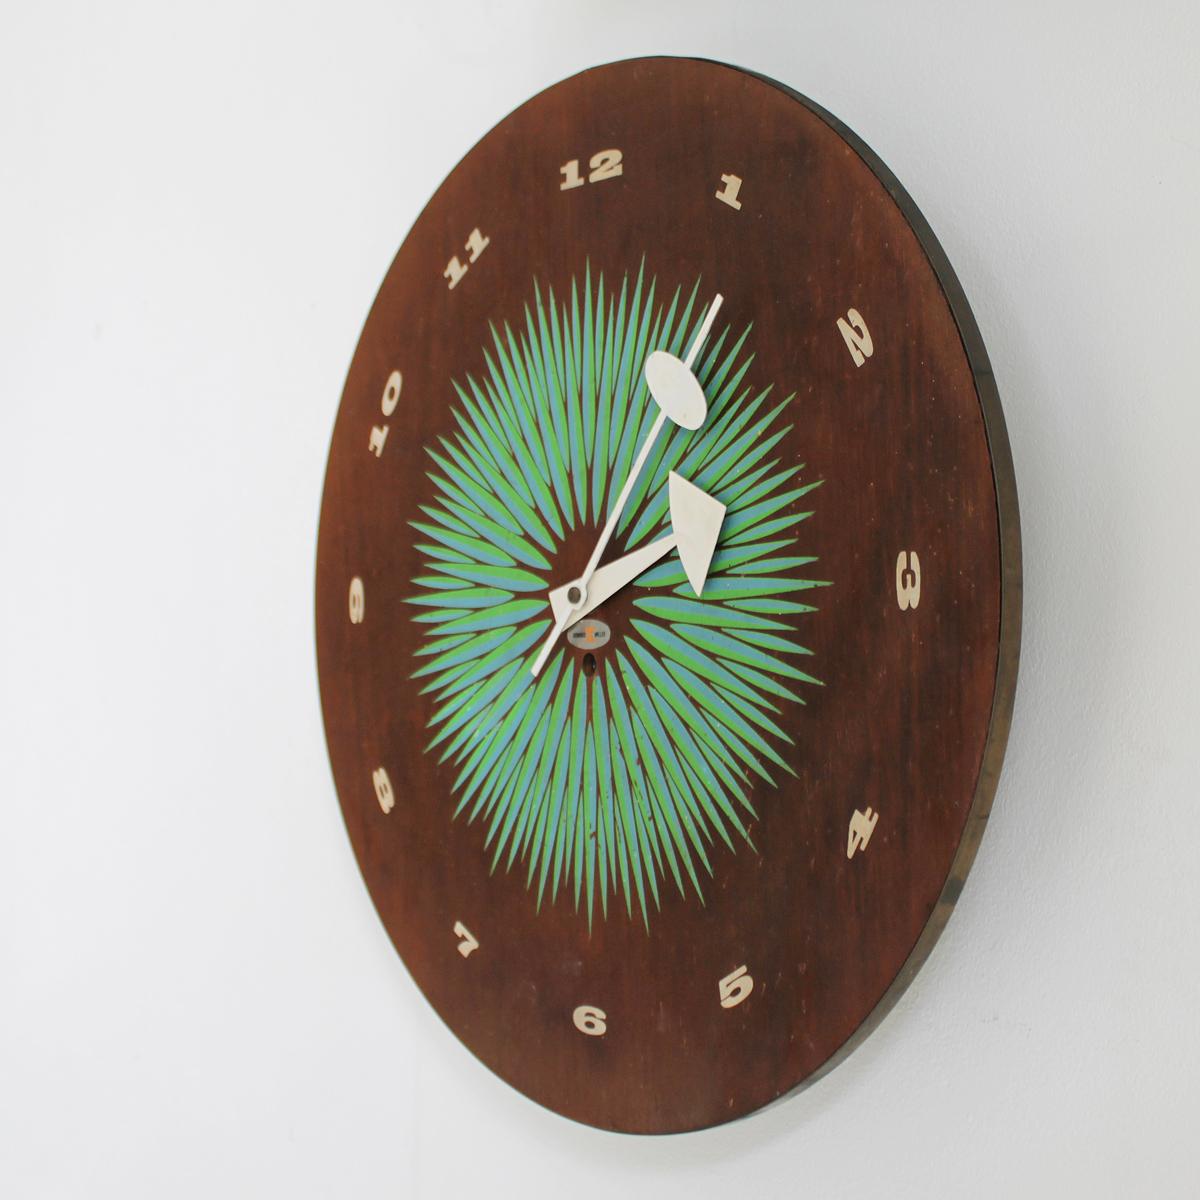 Rare original wall clock Number 2236. Design by George Nelson and Associates for Howard Miller Clock Company, Zeeland Michigan, 1957. 
Walnut dial with silk-screened pattern in green and blue. White numerals and hands. Mechanical clock work with a